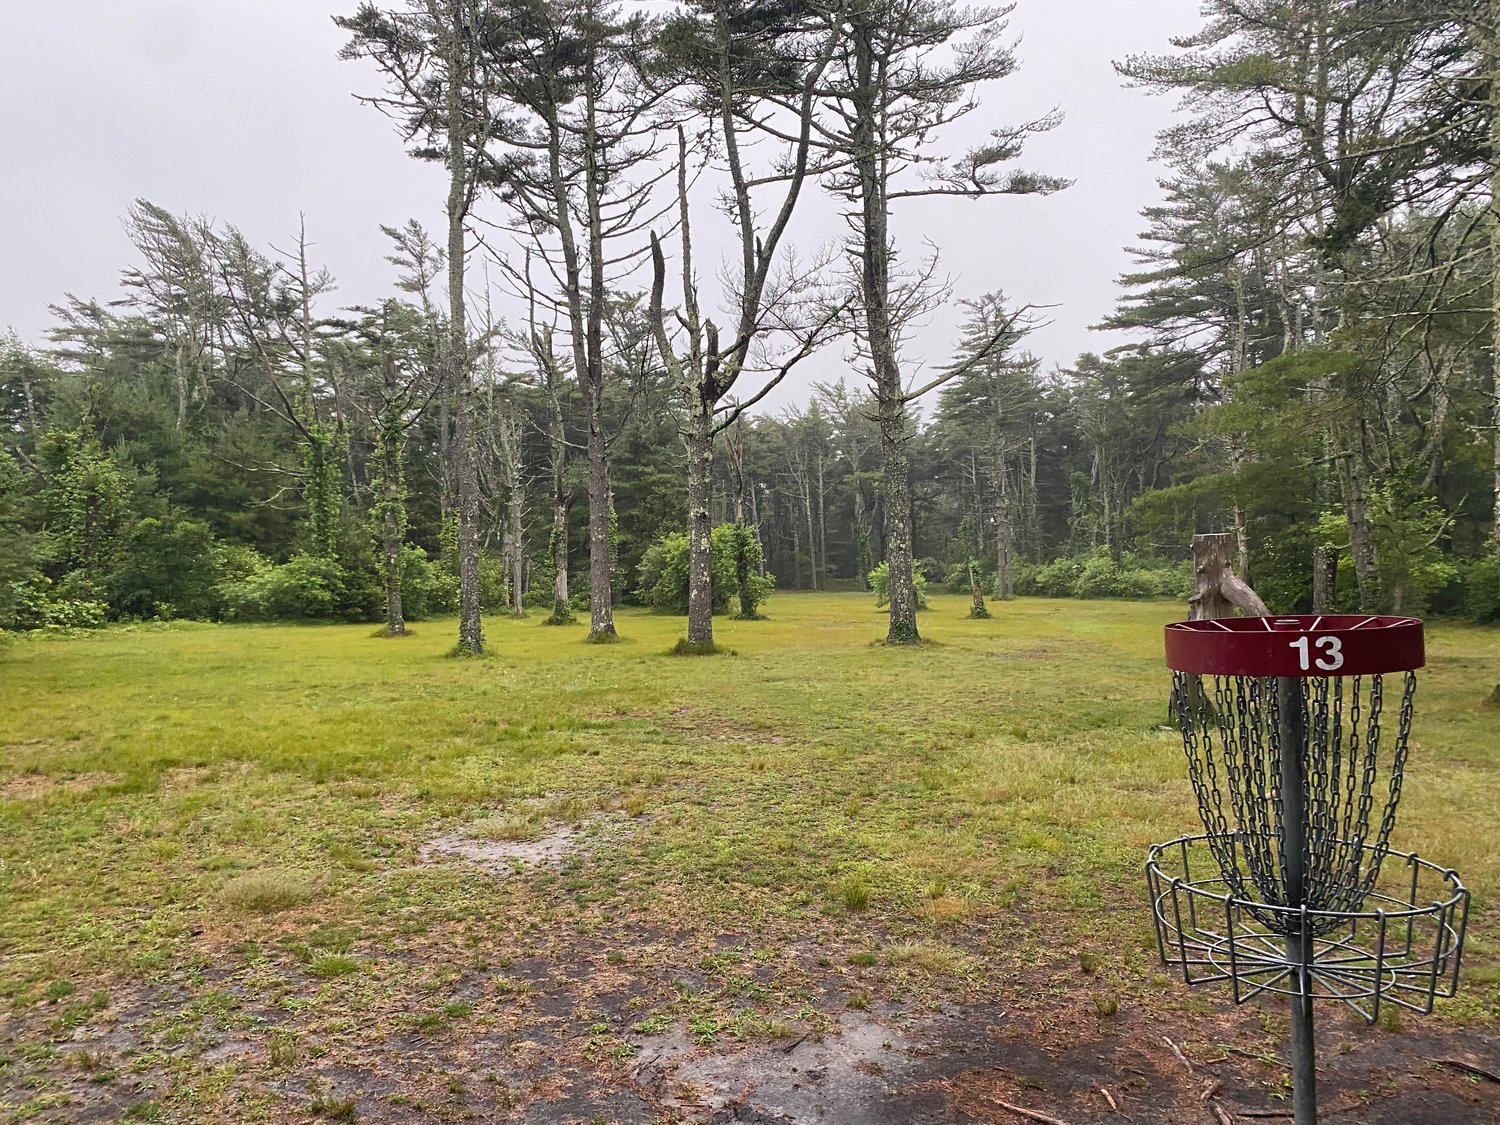 The 13th basket at the Nantucket Disc Golf Course is a wide-open fairway for disc golfers, and a pretty good walk for anyone else going through the State Forest.